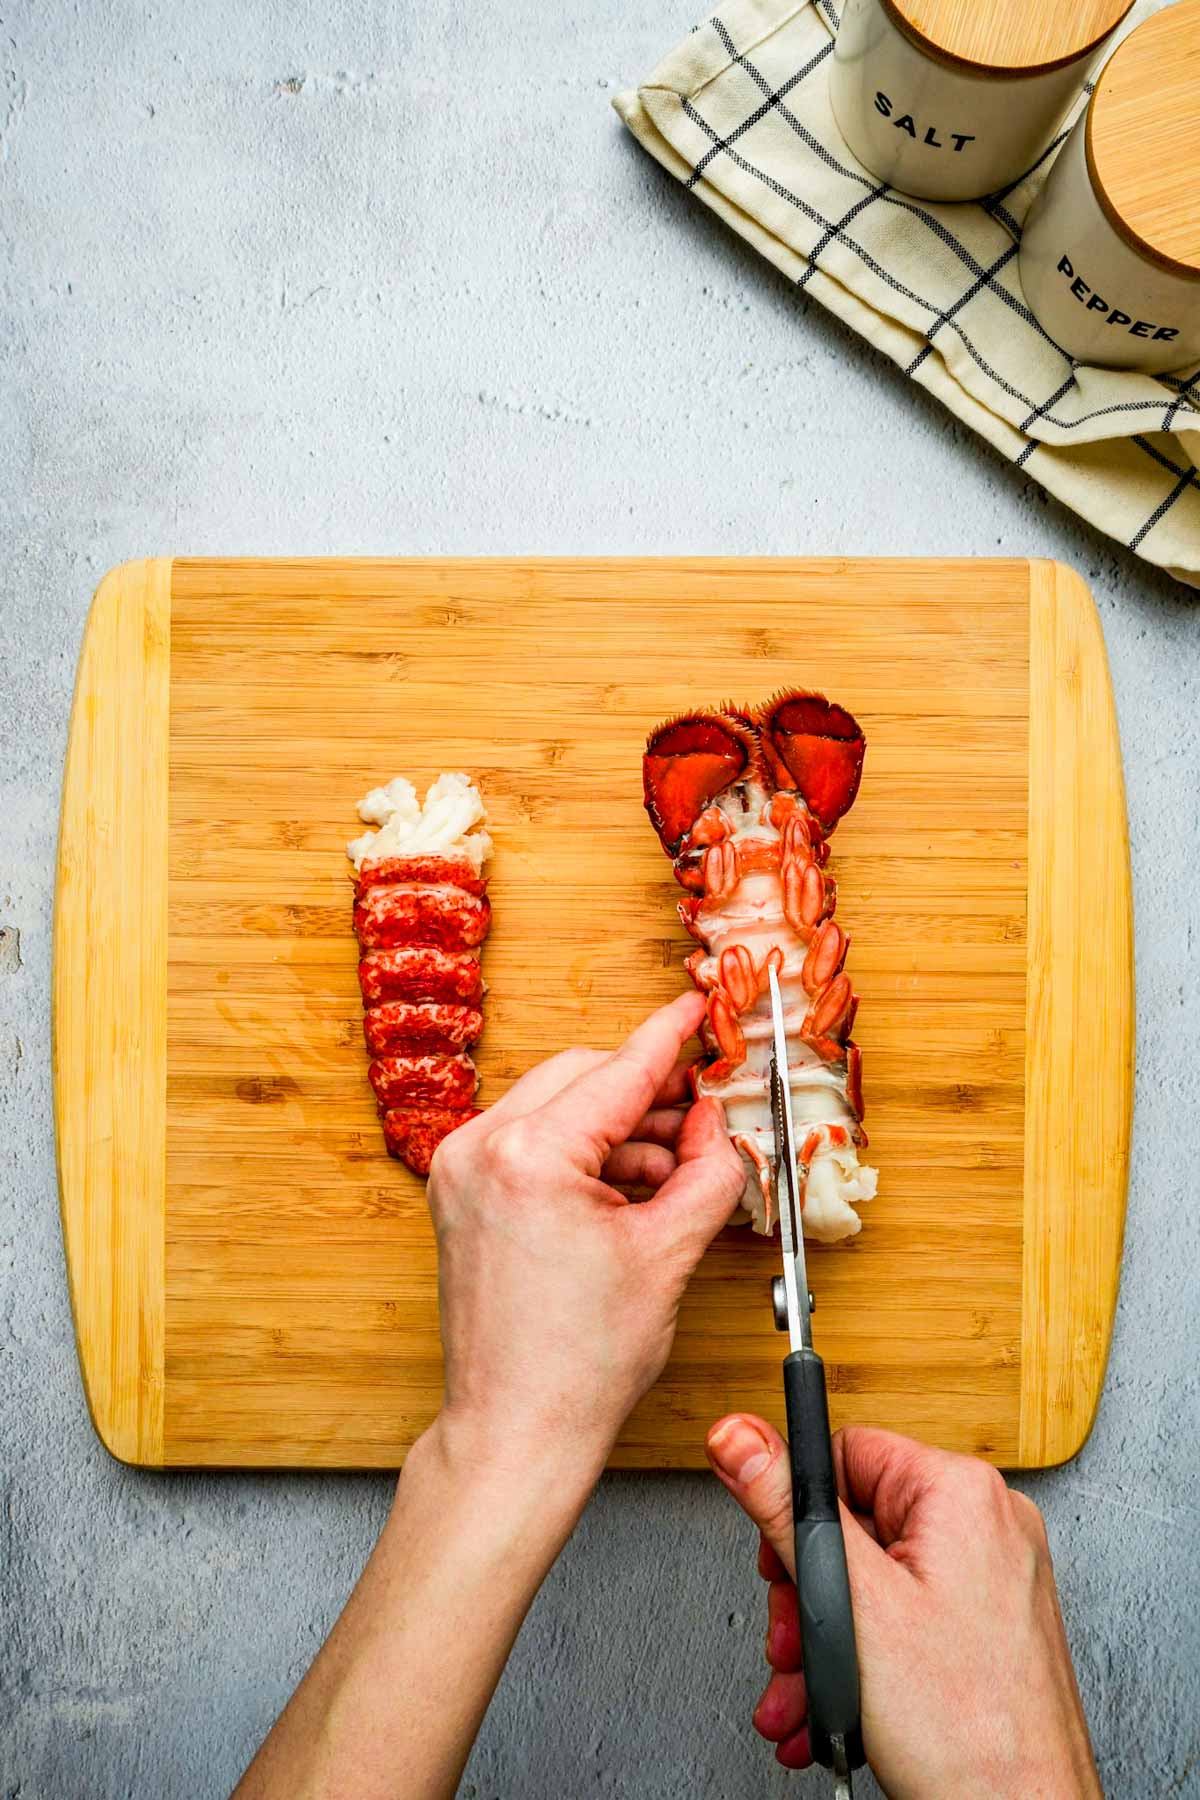 lobster tail being cut open with kitchen shears.